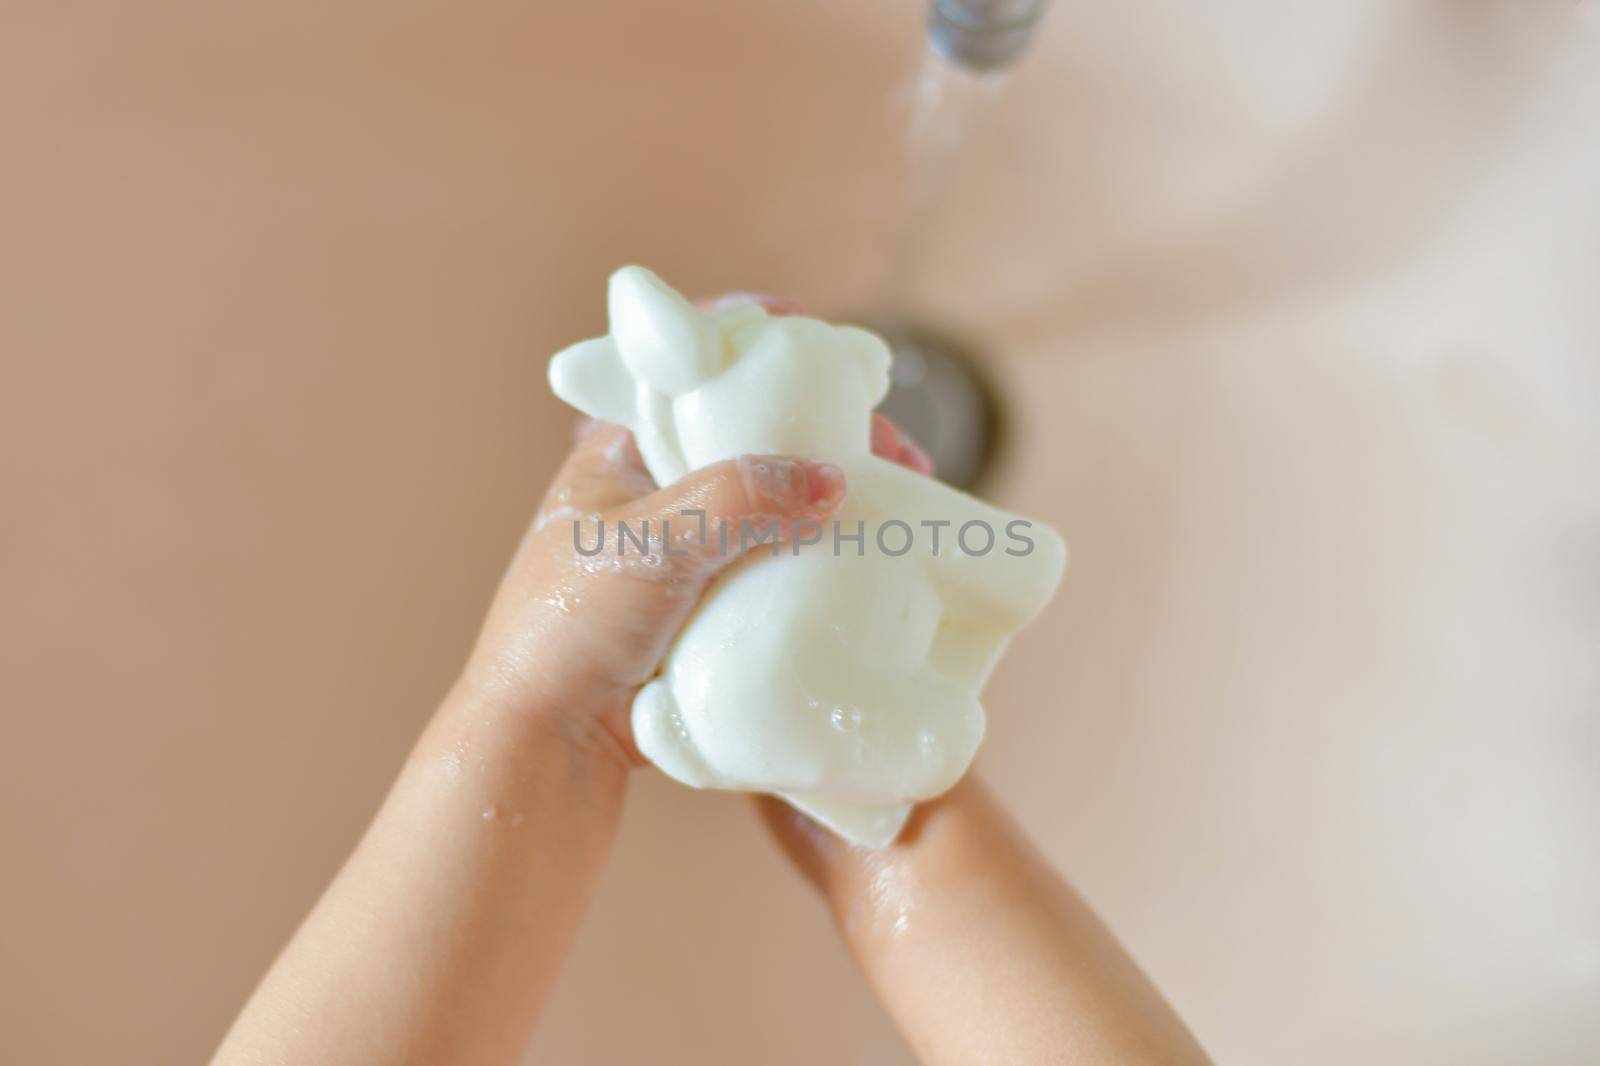 A child washes his hands with soap at home